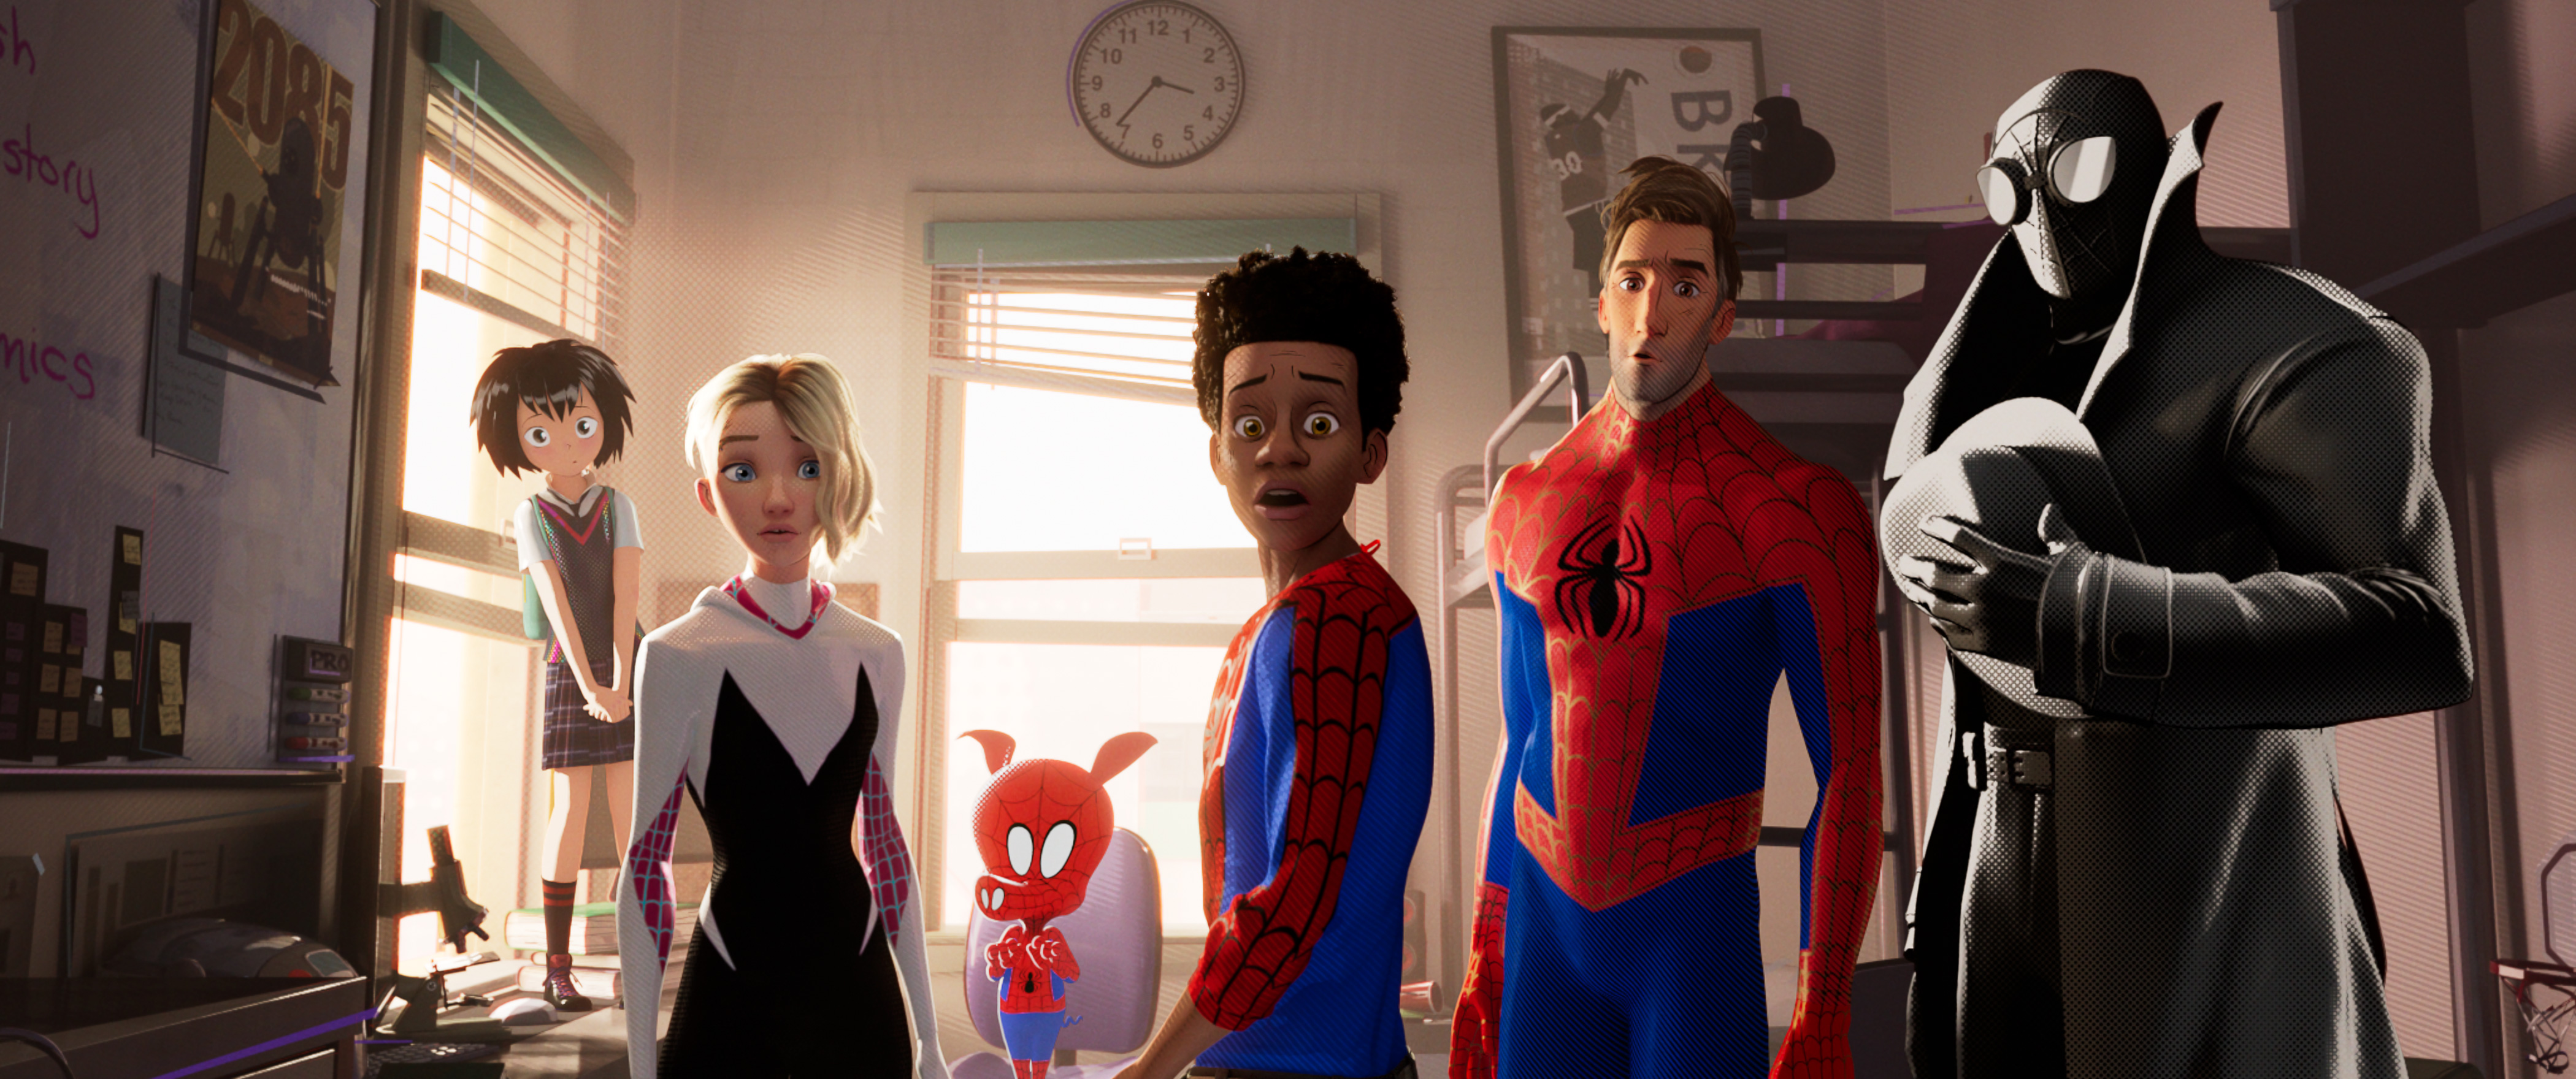 Spider-Man: Across The Spider-Verse at an AMC Theatre near you.